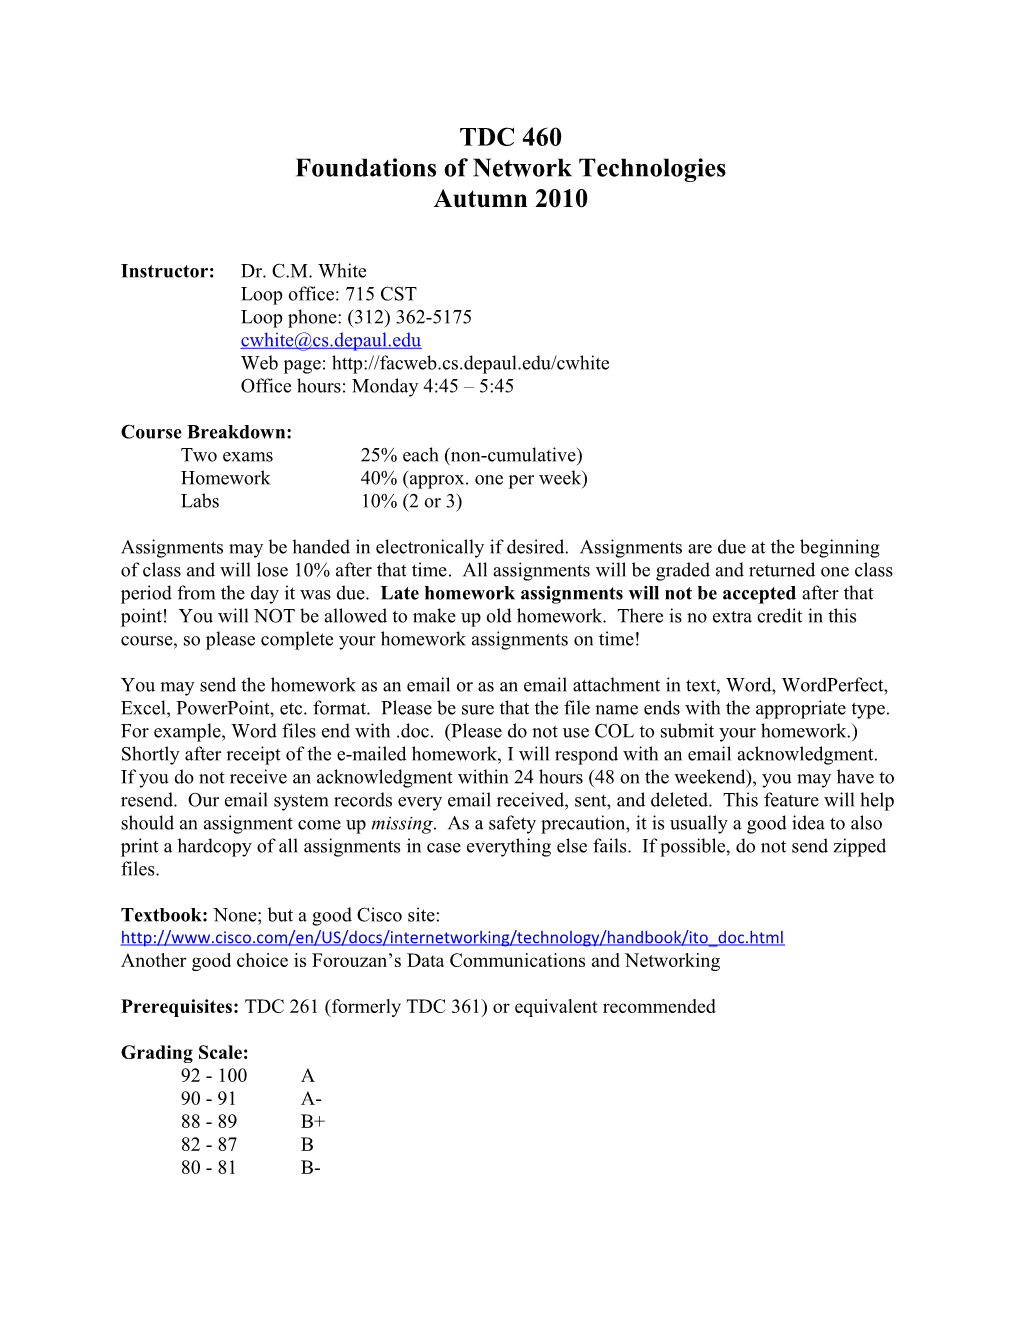 Foundations of Network Technologies